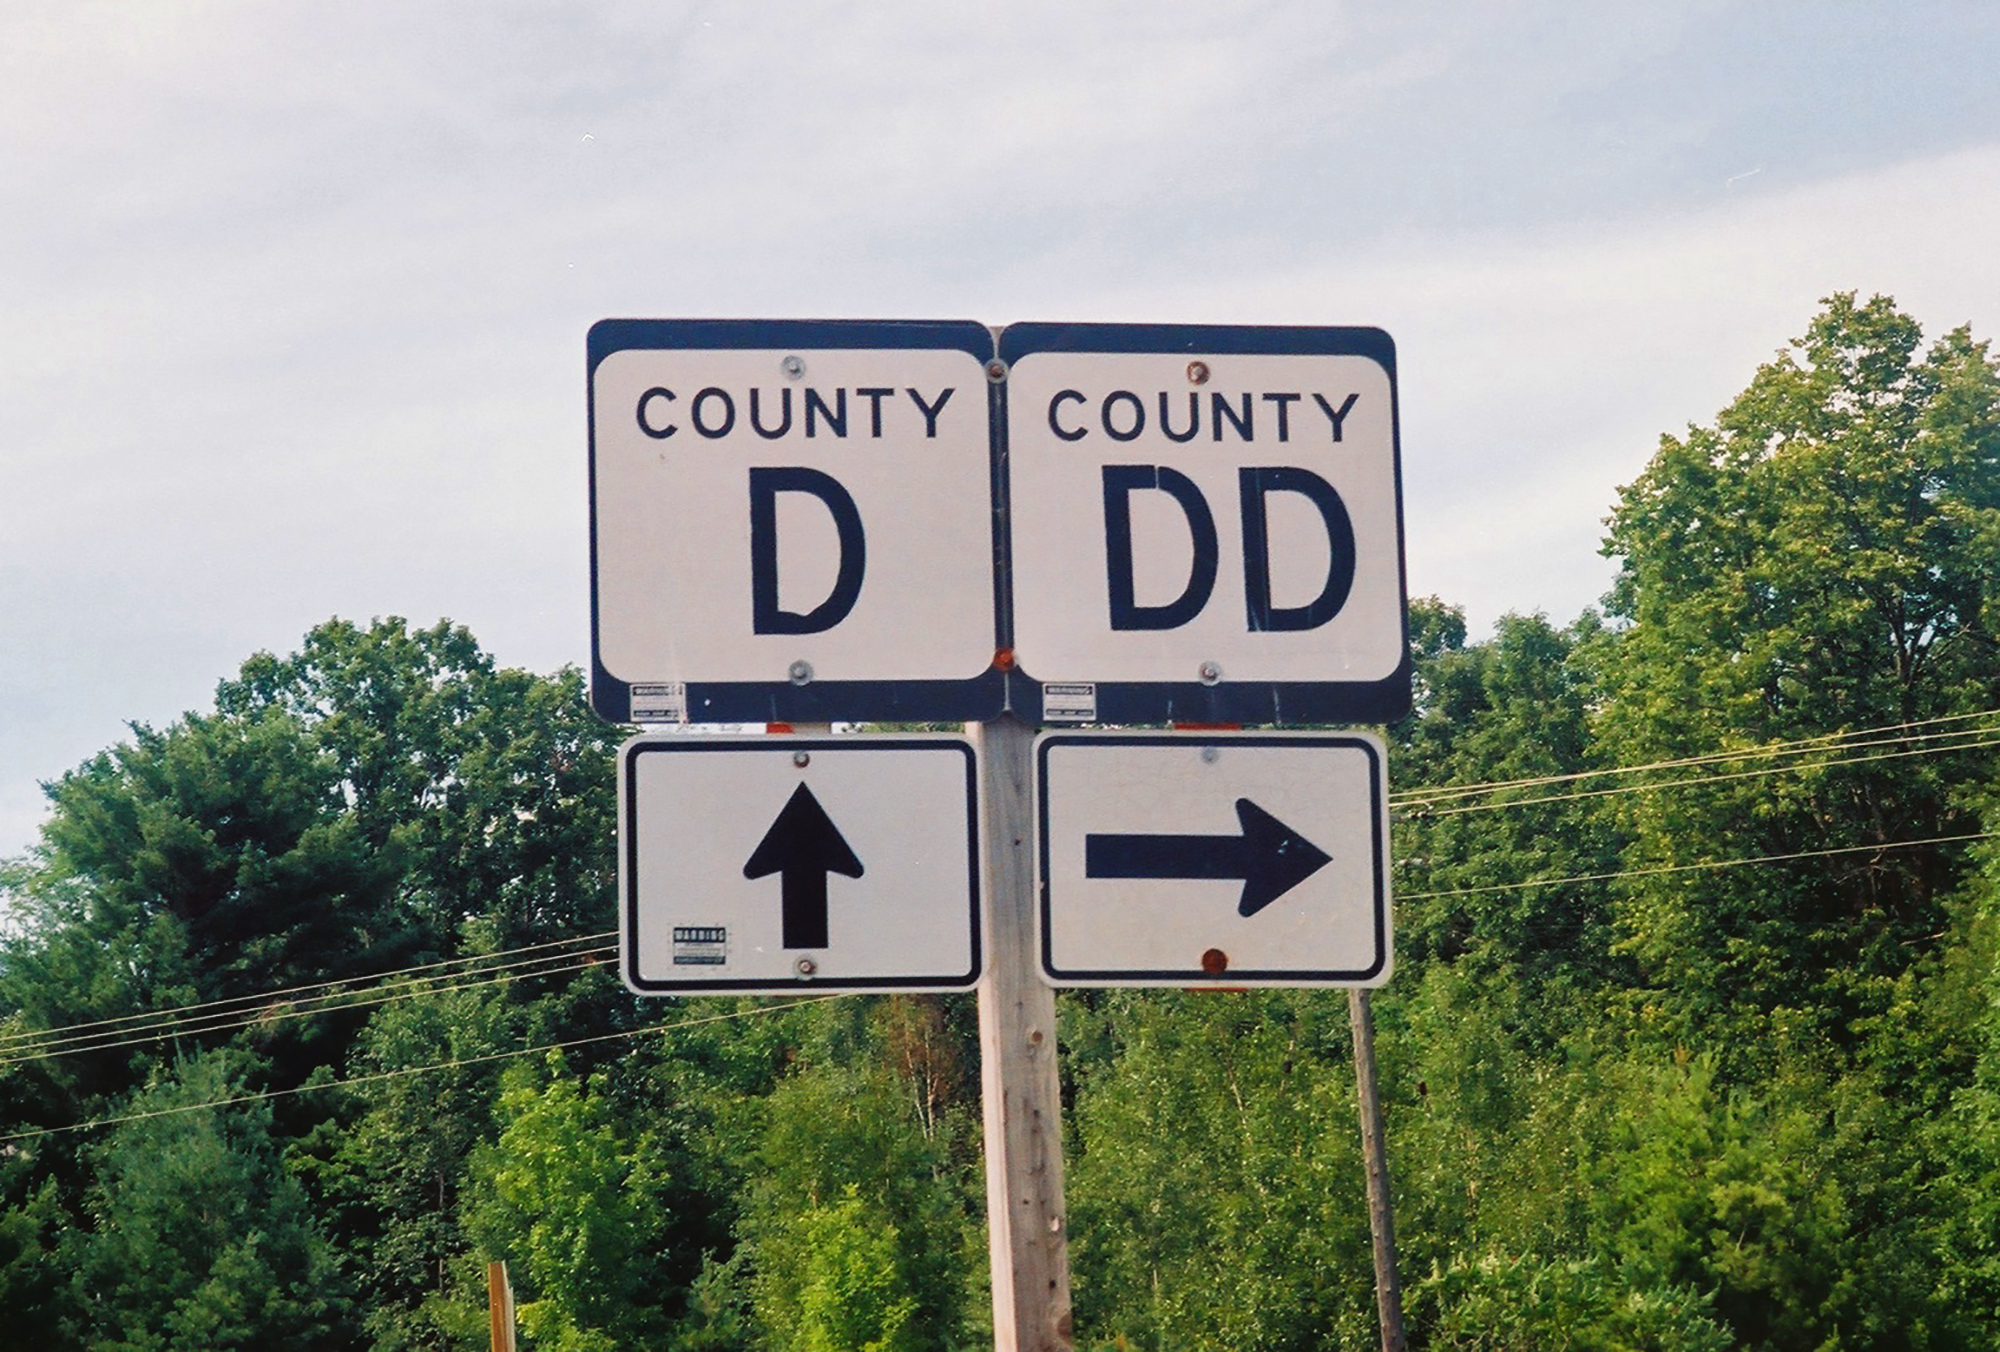 County D and County DD